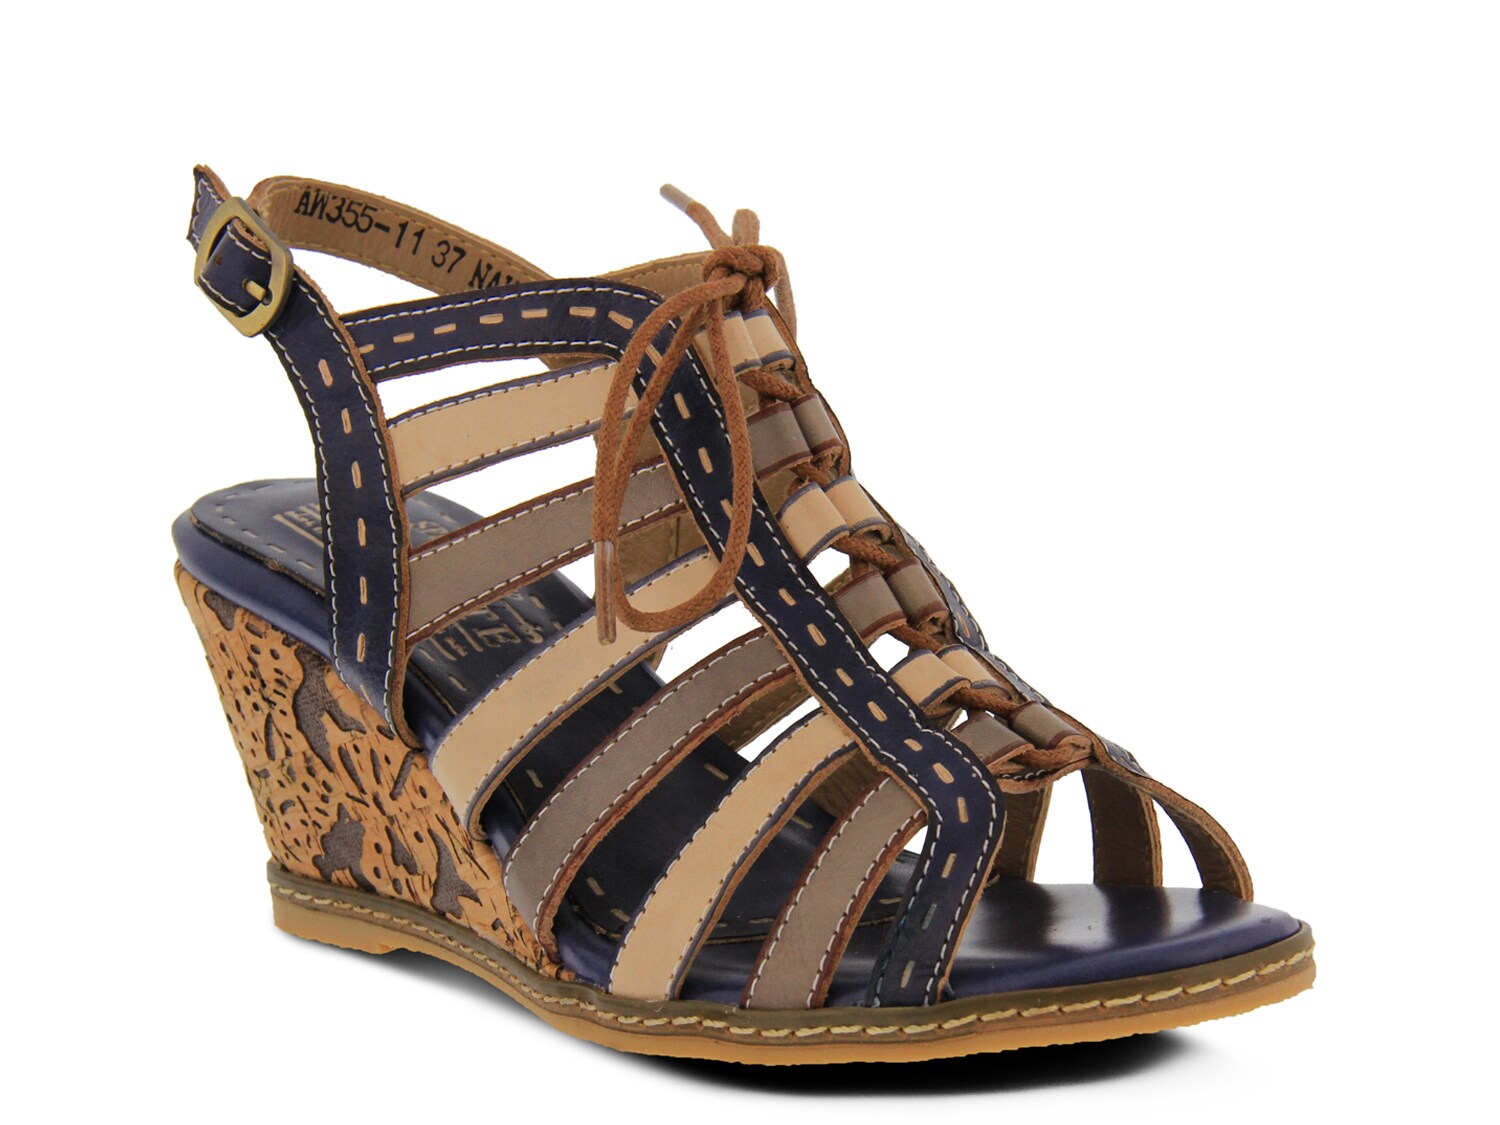 L'Artiste by Spring Step Quinne Wedge Sandal - Free Shipping | DSW